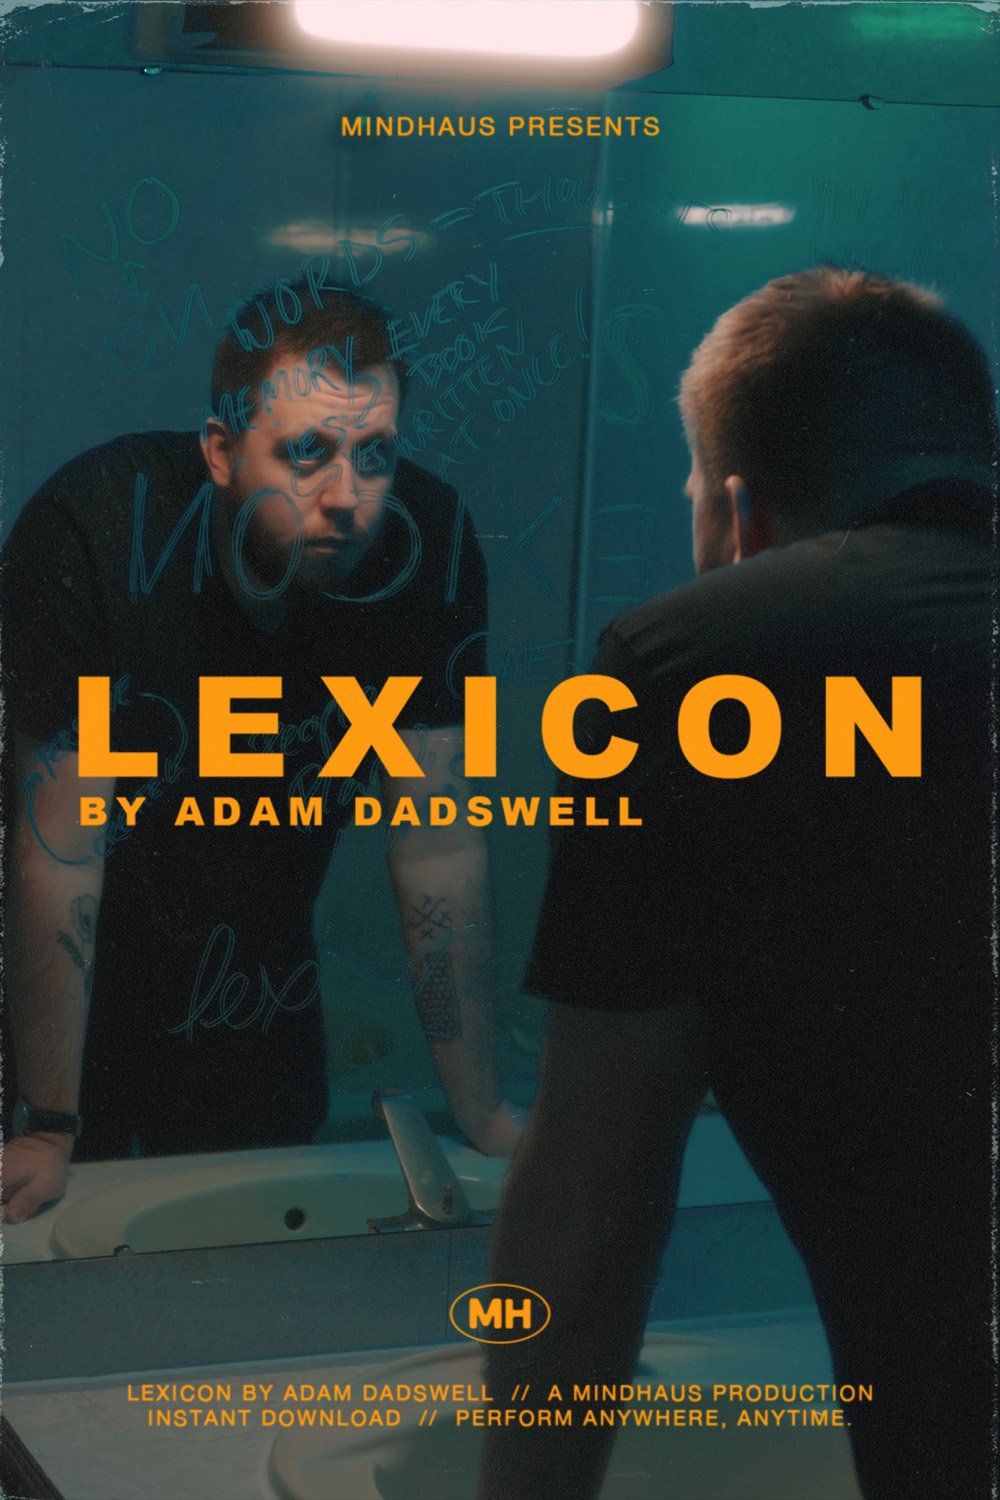 Adam Dadswell - Lexicon